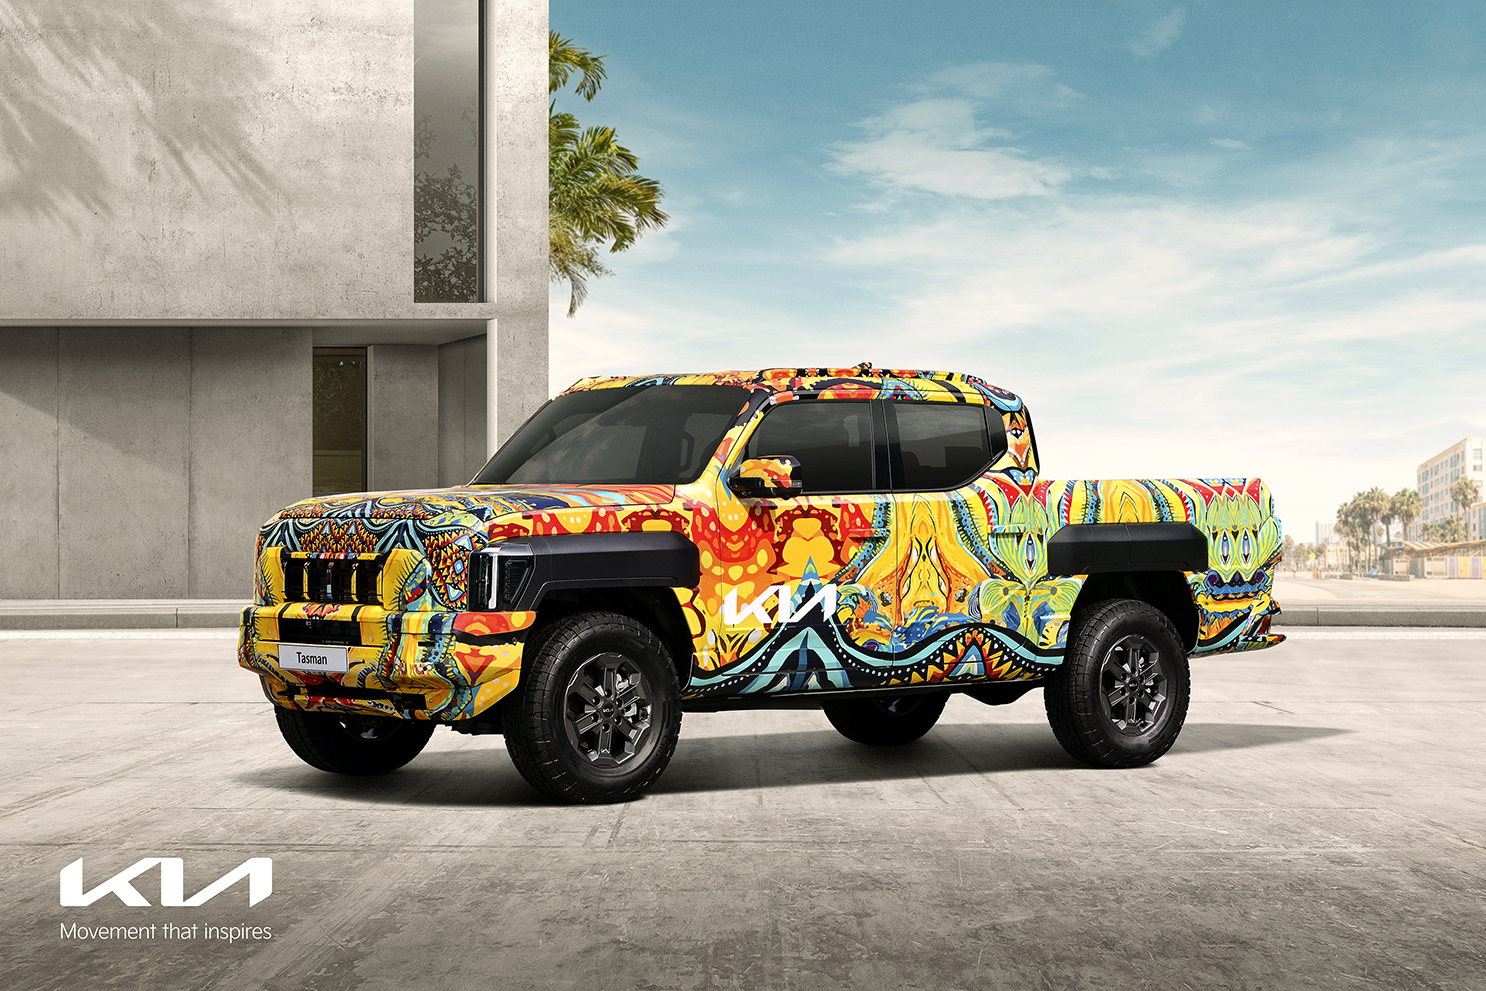 Kia Unveils Unique Camouflage For Its First-Ever Tasman Pickup TrucK